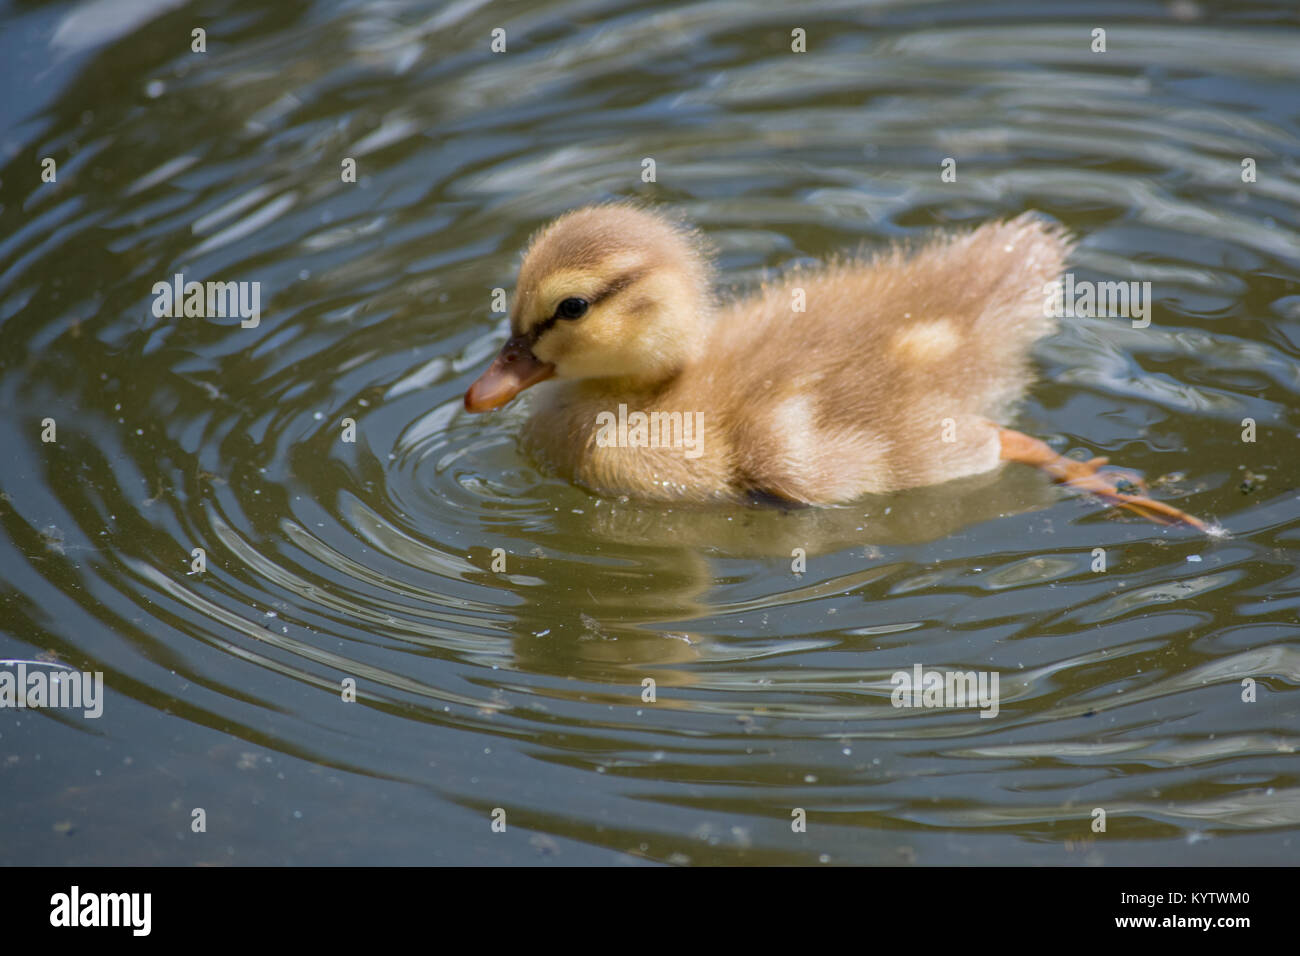 Little baby duckling. Stock Photo